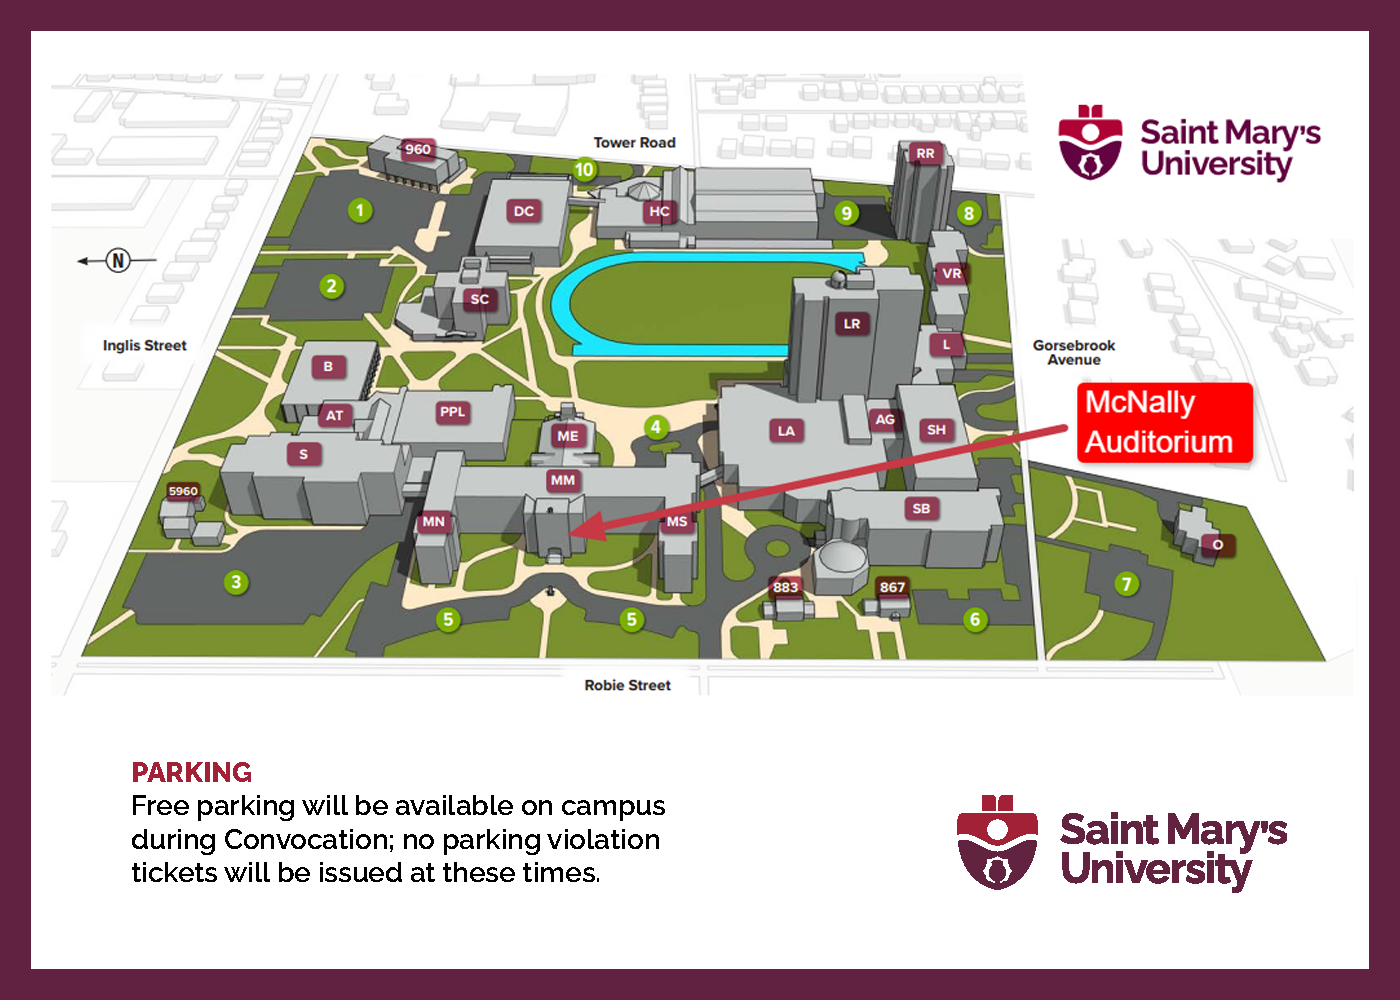 A map of campus showing the location of the McNally Auditorium